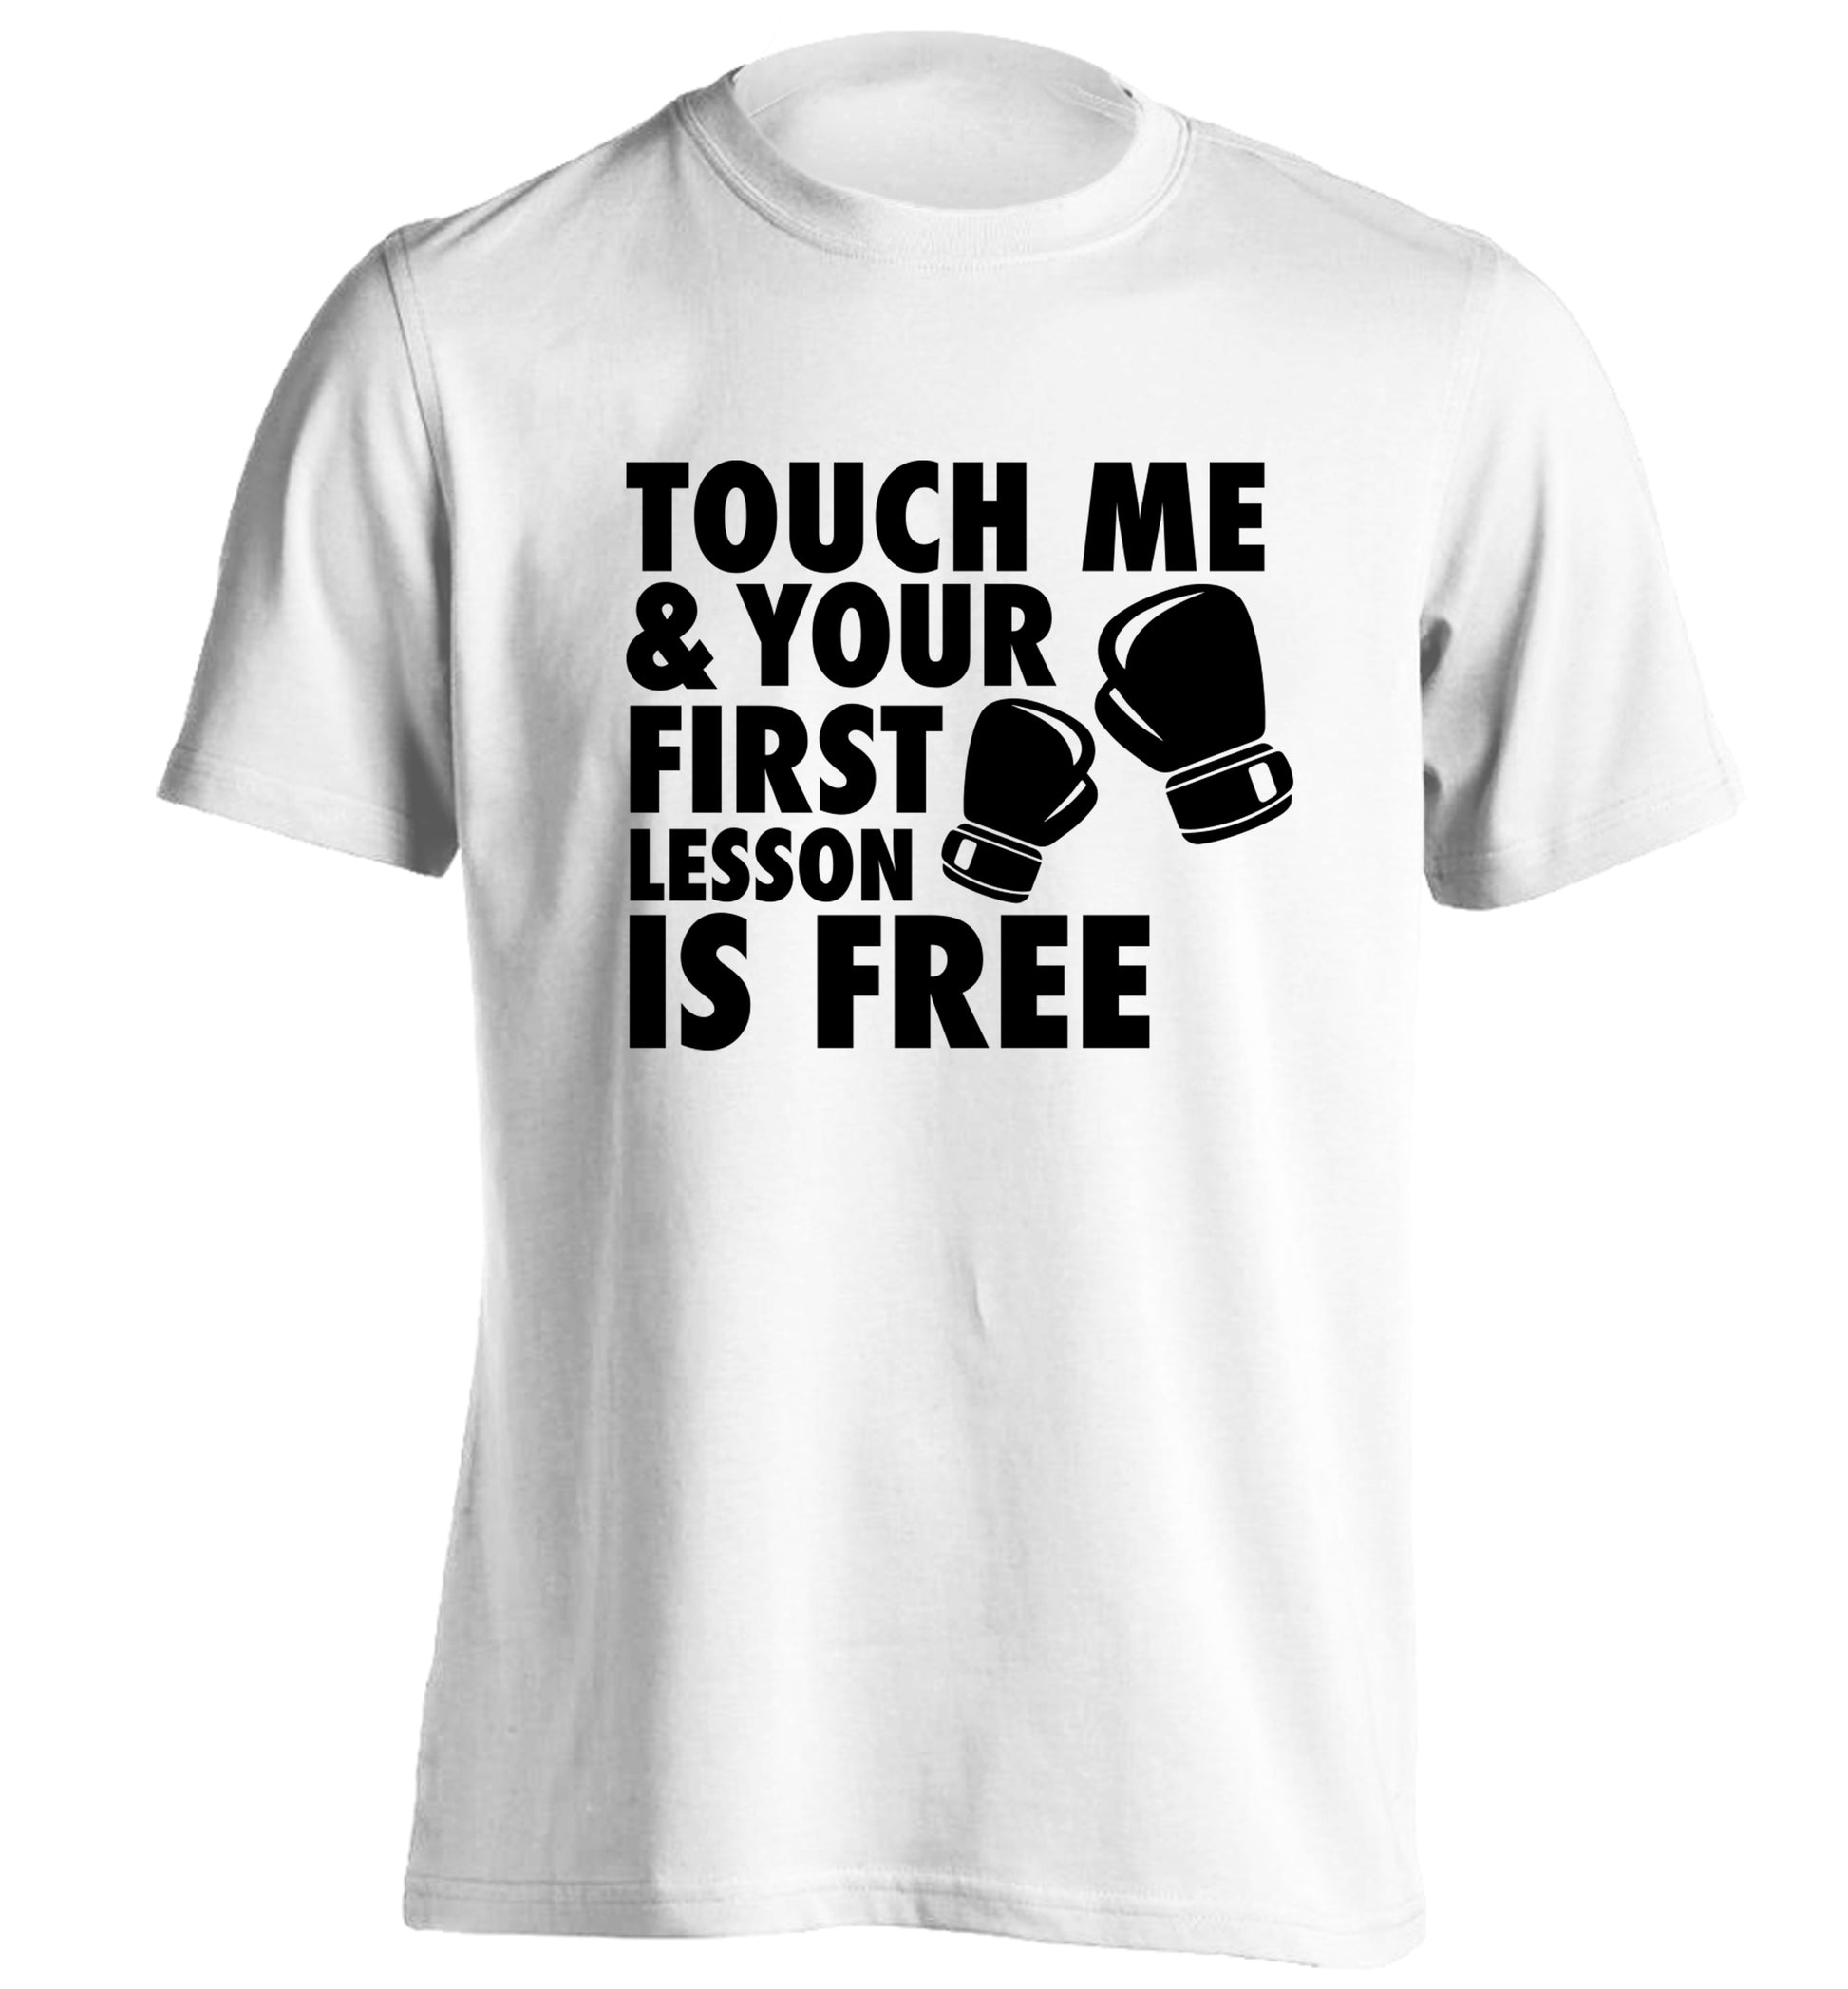 Touch me and your First Lesson is Free  adults unisex white Tshirt 2XL